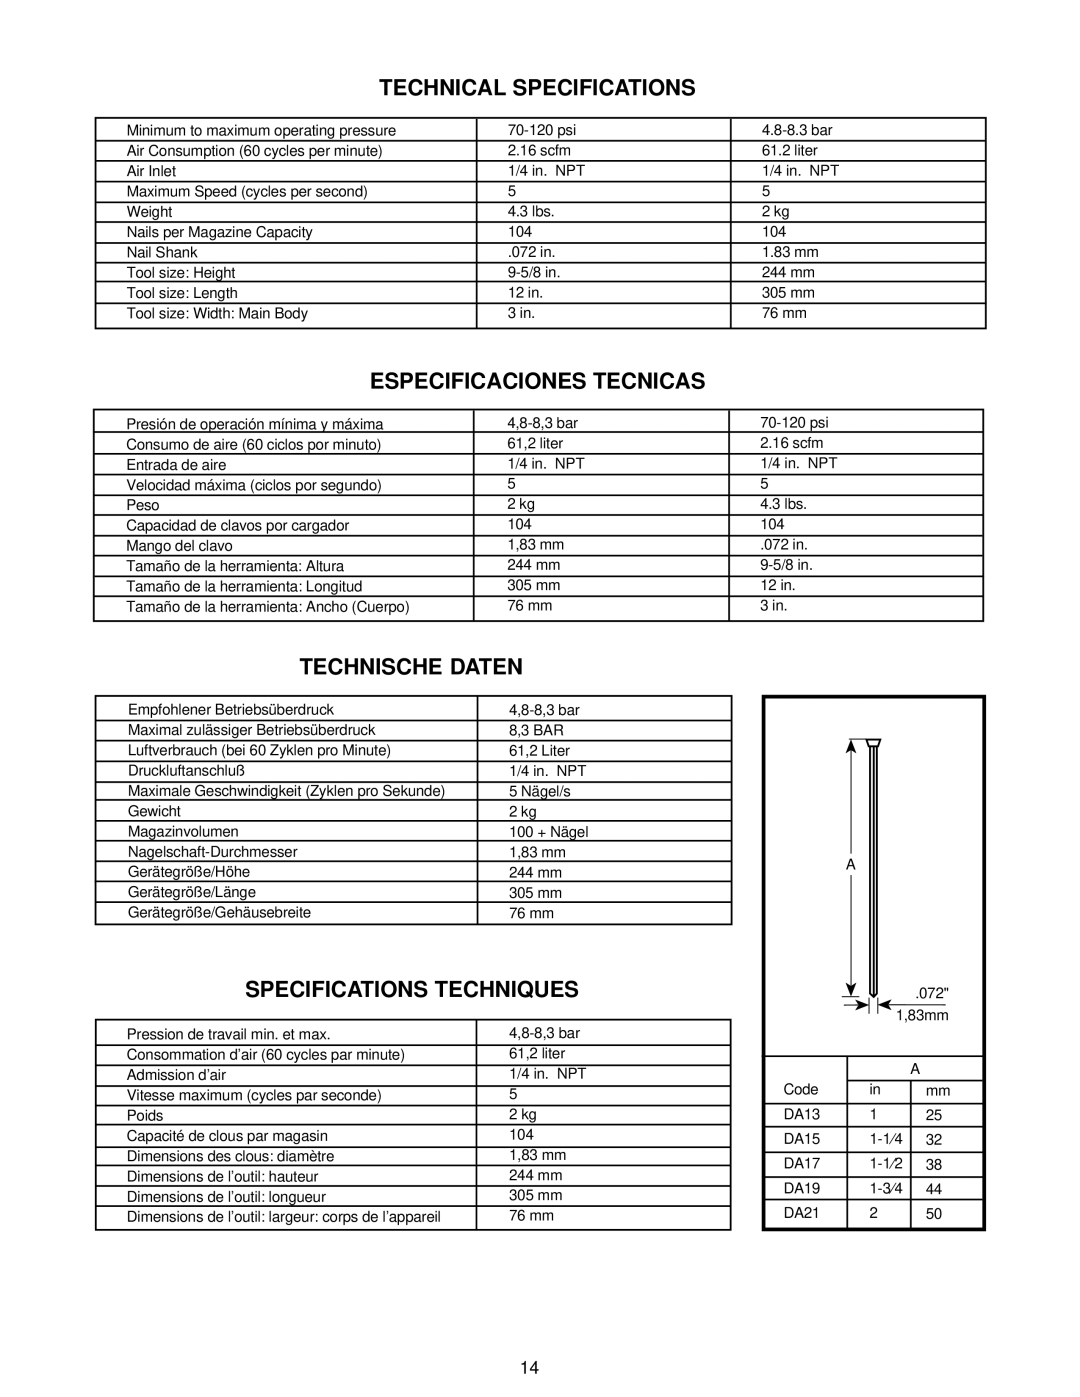 Senco SFN1+ operating instructions Technical Specifications 